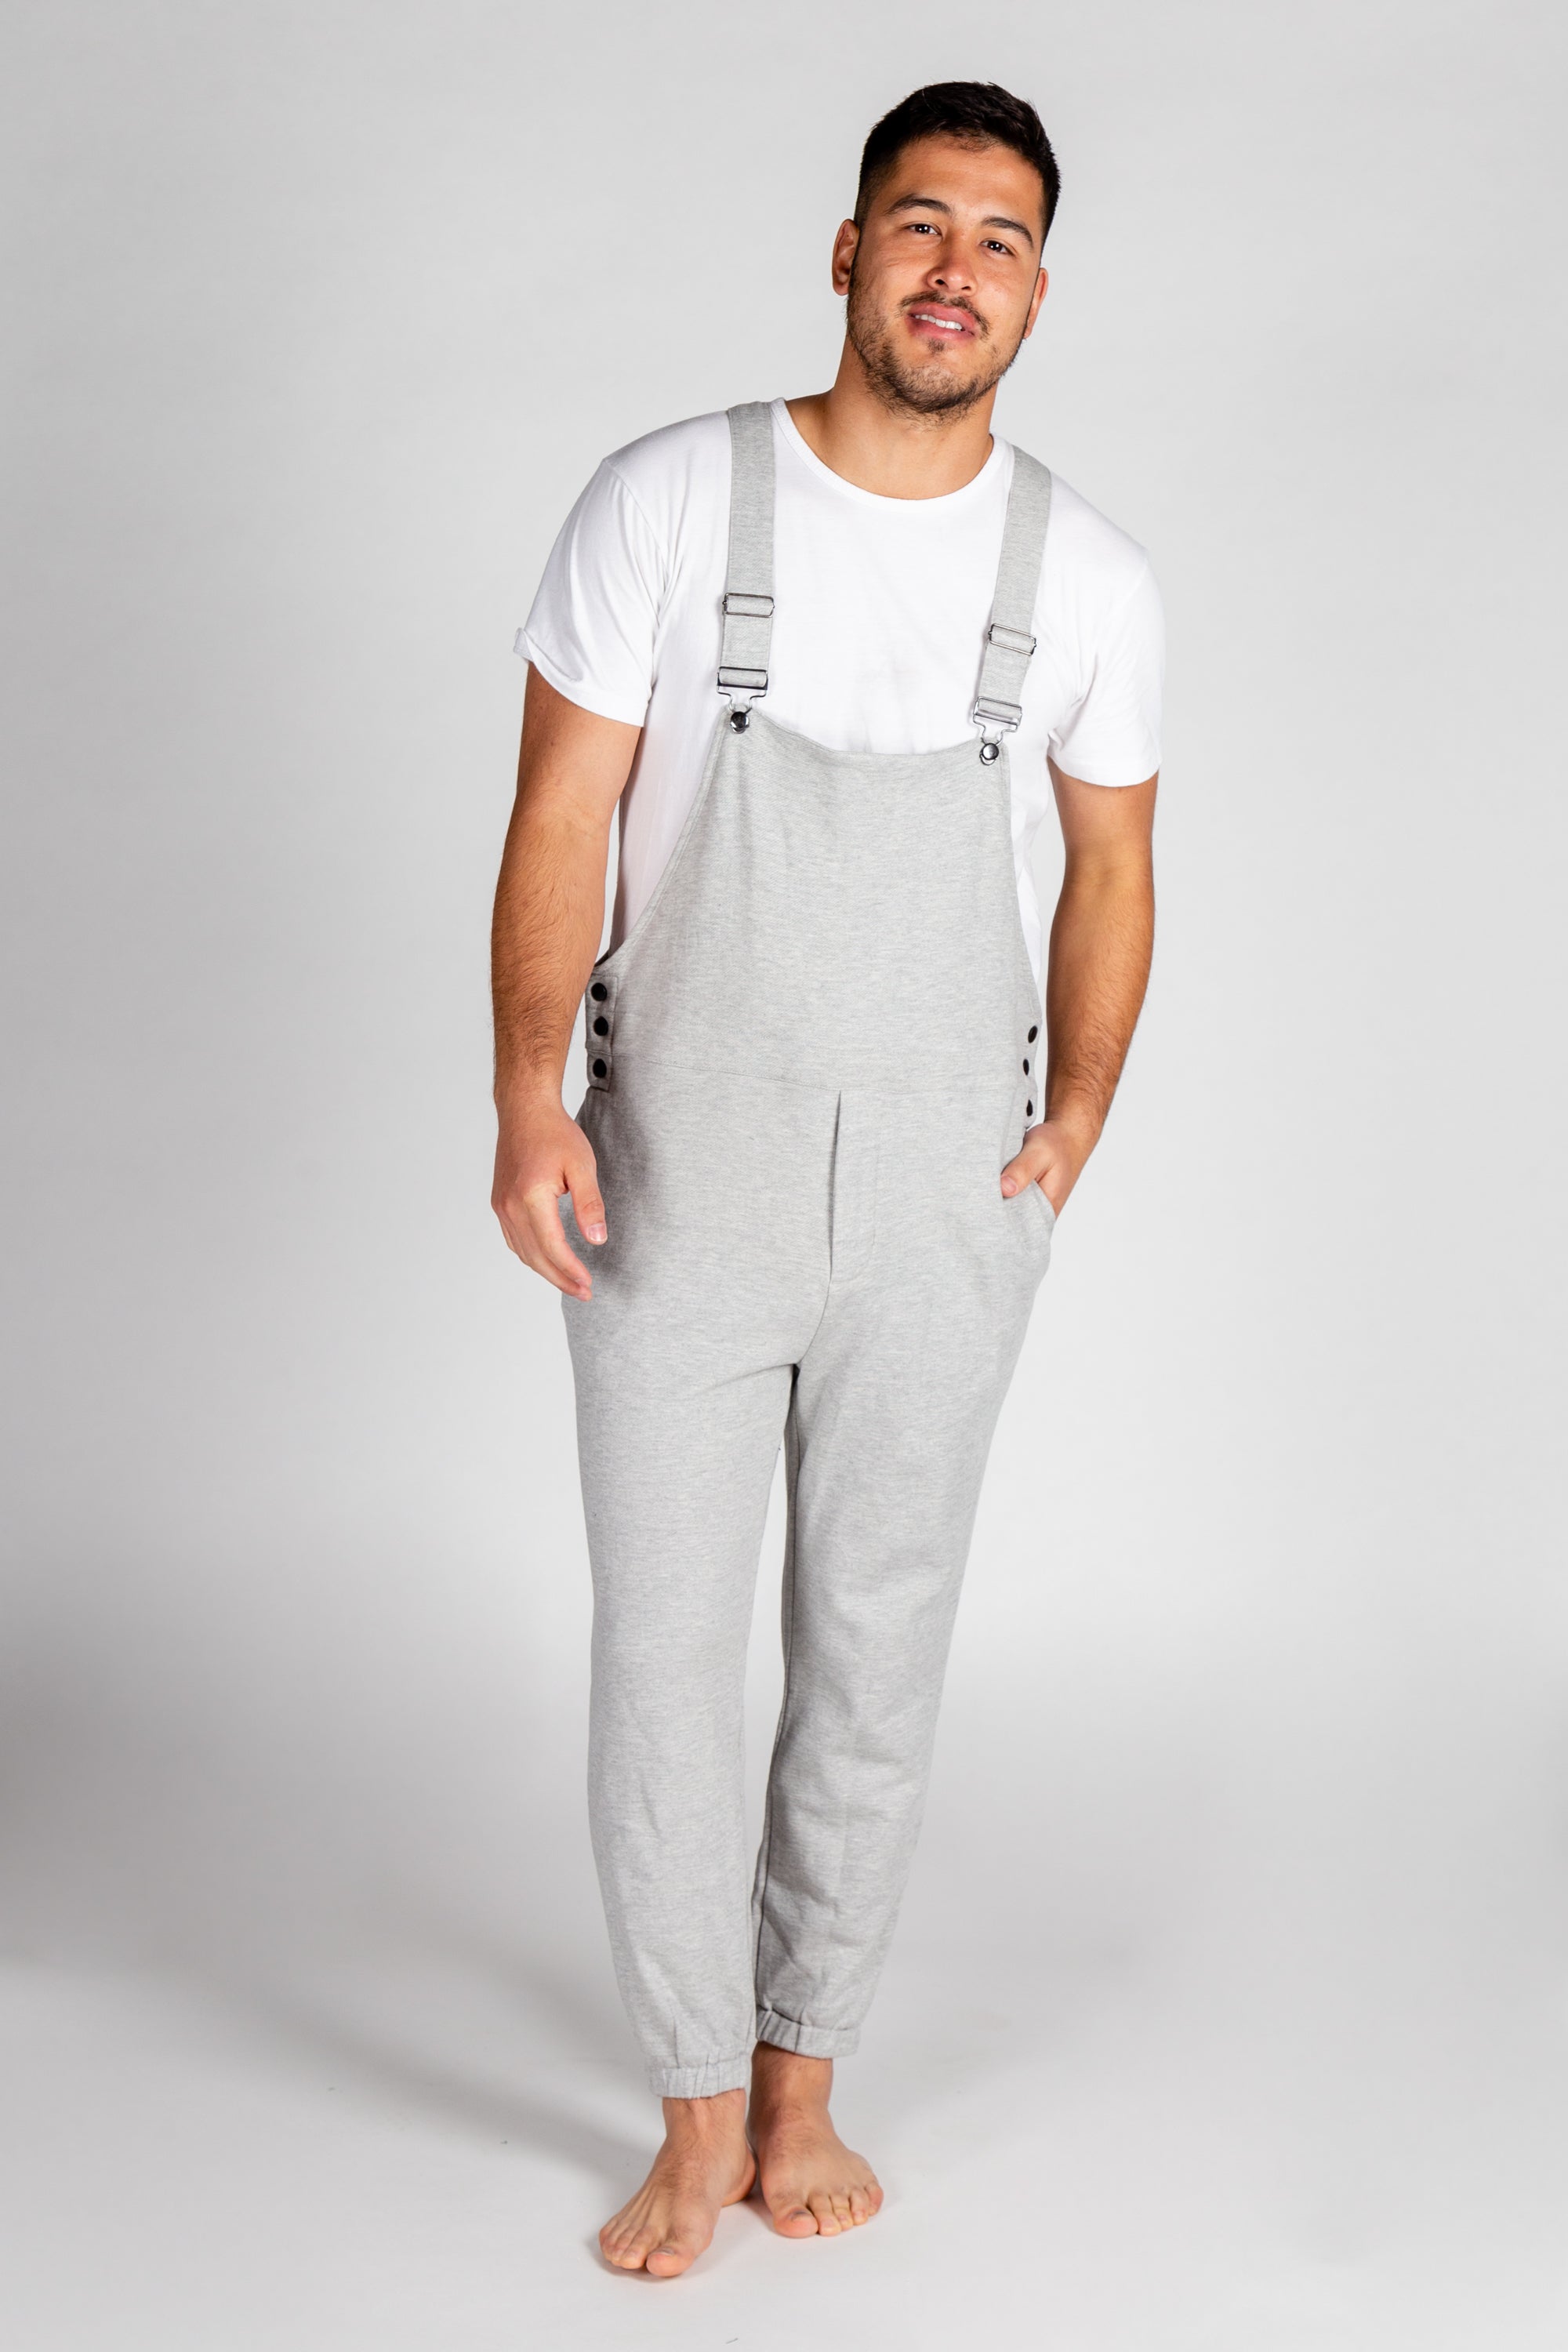 Grey reflective overall